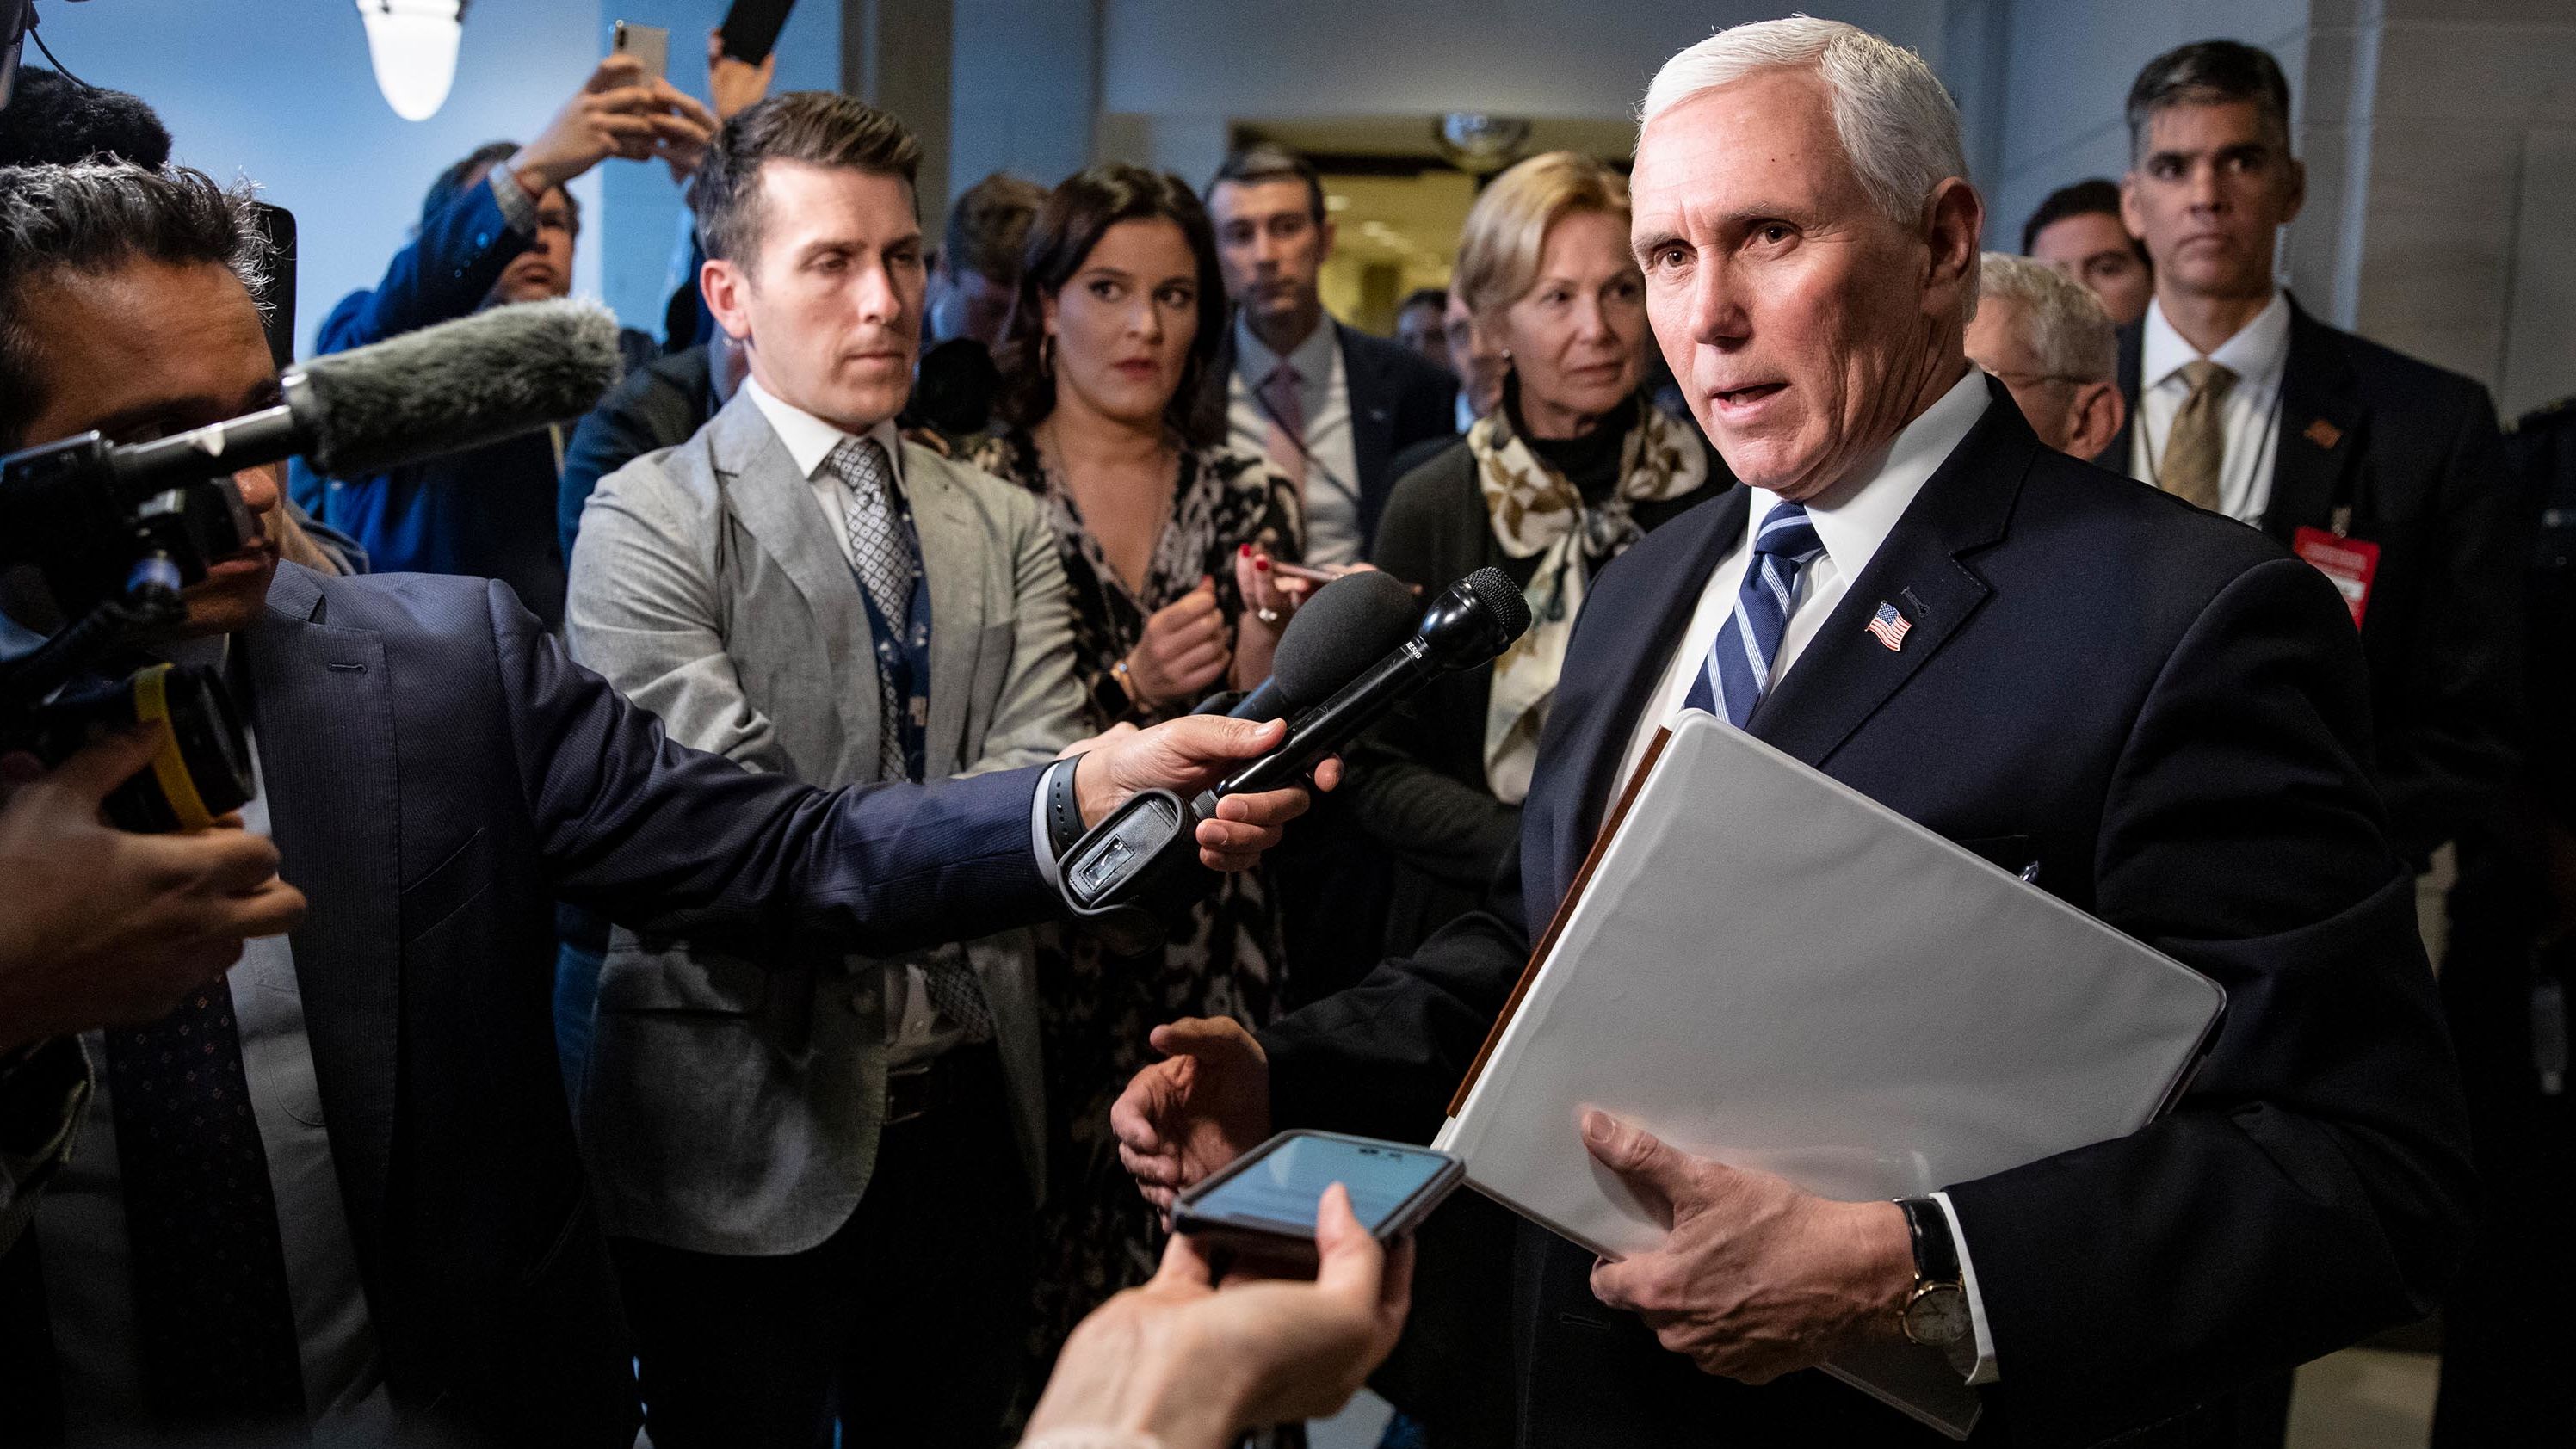 Pence stops to talk to reporters after meeting with congressional Democrats and Republicans in March 2020.